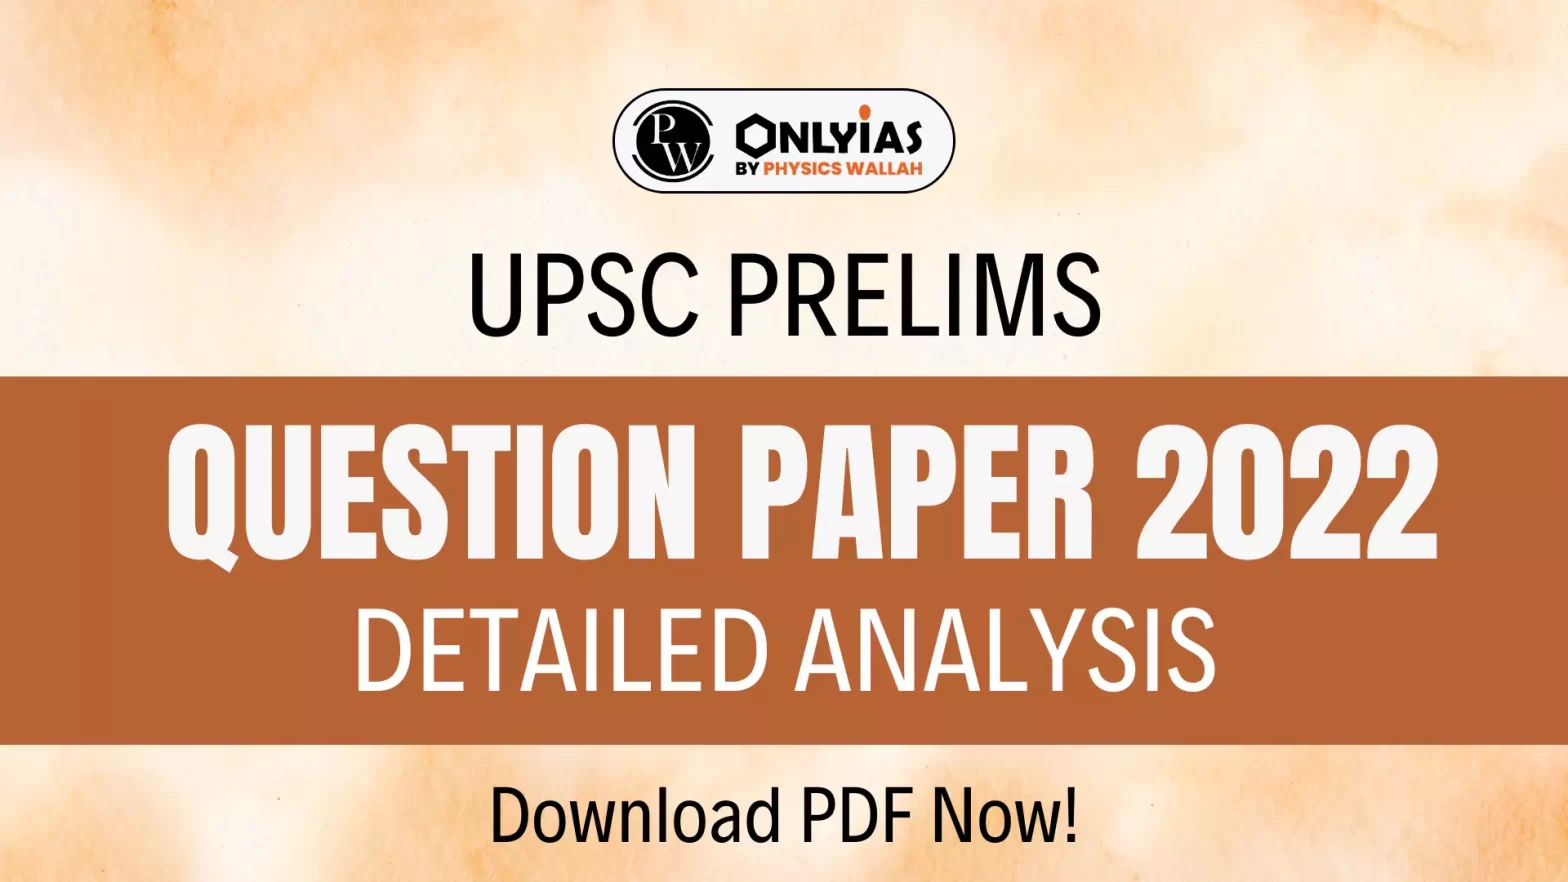 UPSC Prelims Question Paper 2022, Detailed Analysis, Download PDF Now!